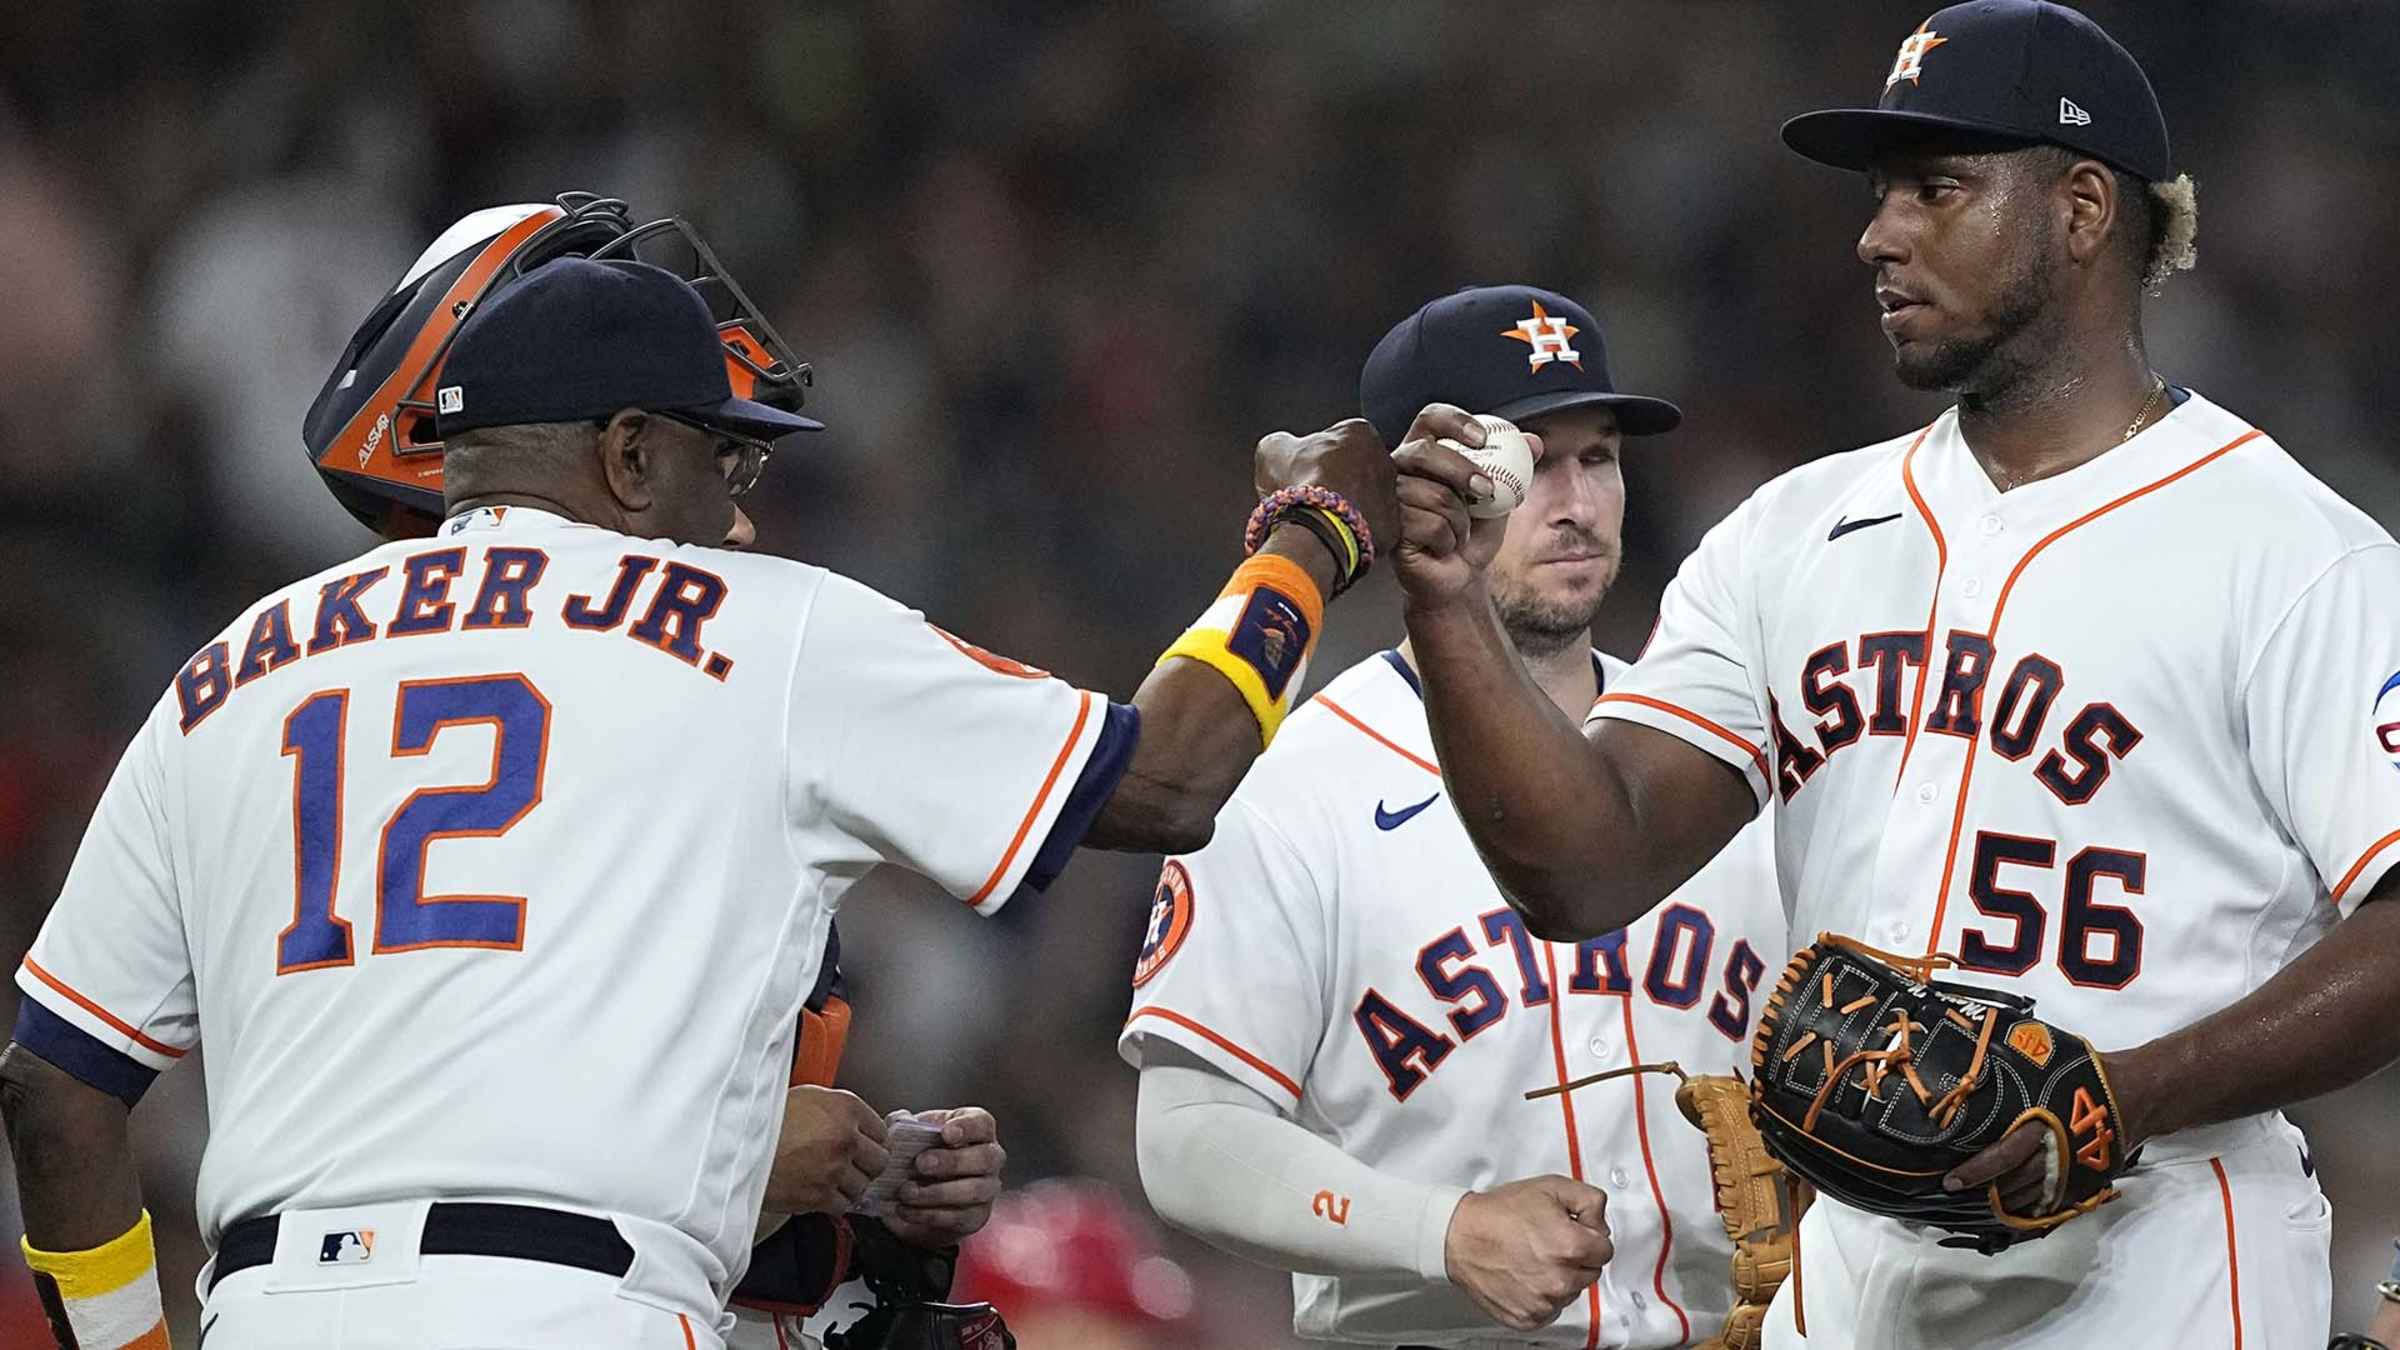 Starting Nine: Astros 2017 Lineup - The Crawfish Boxes